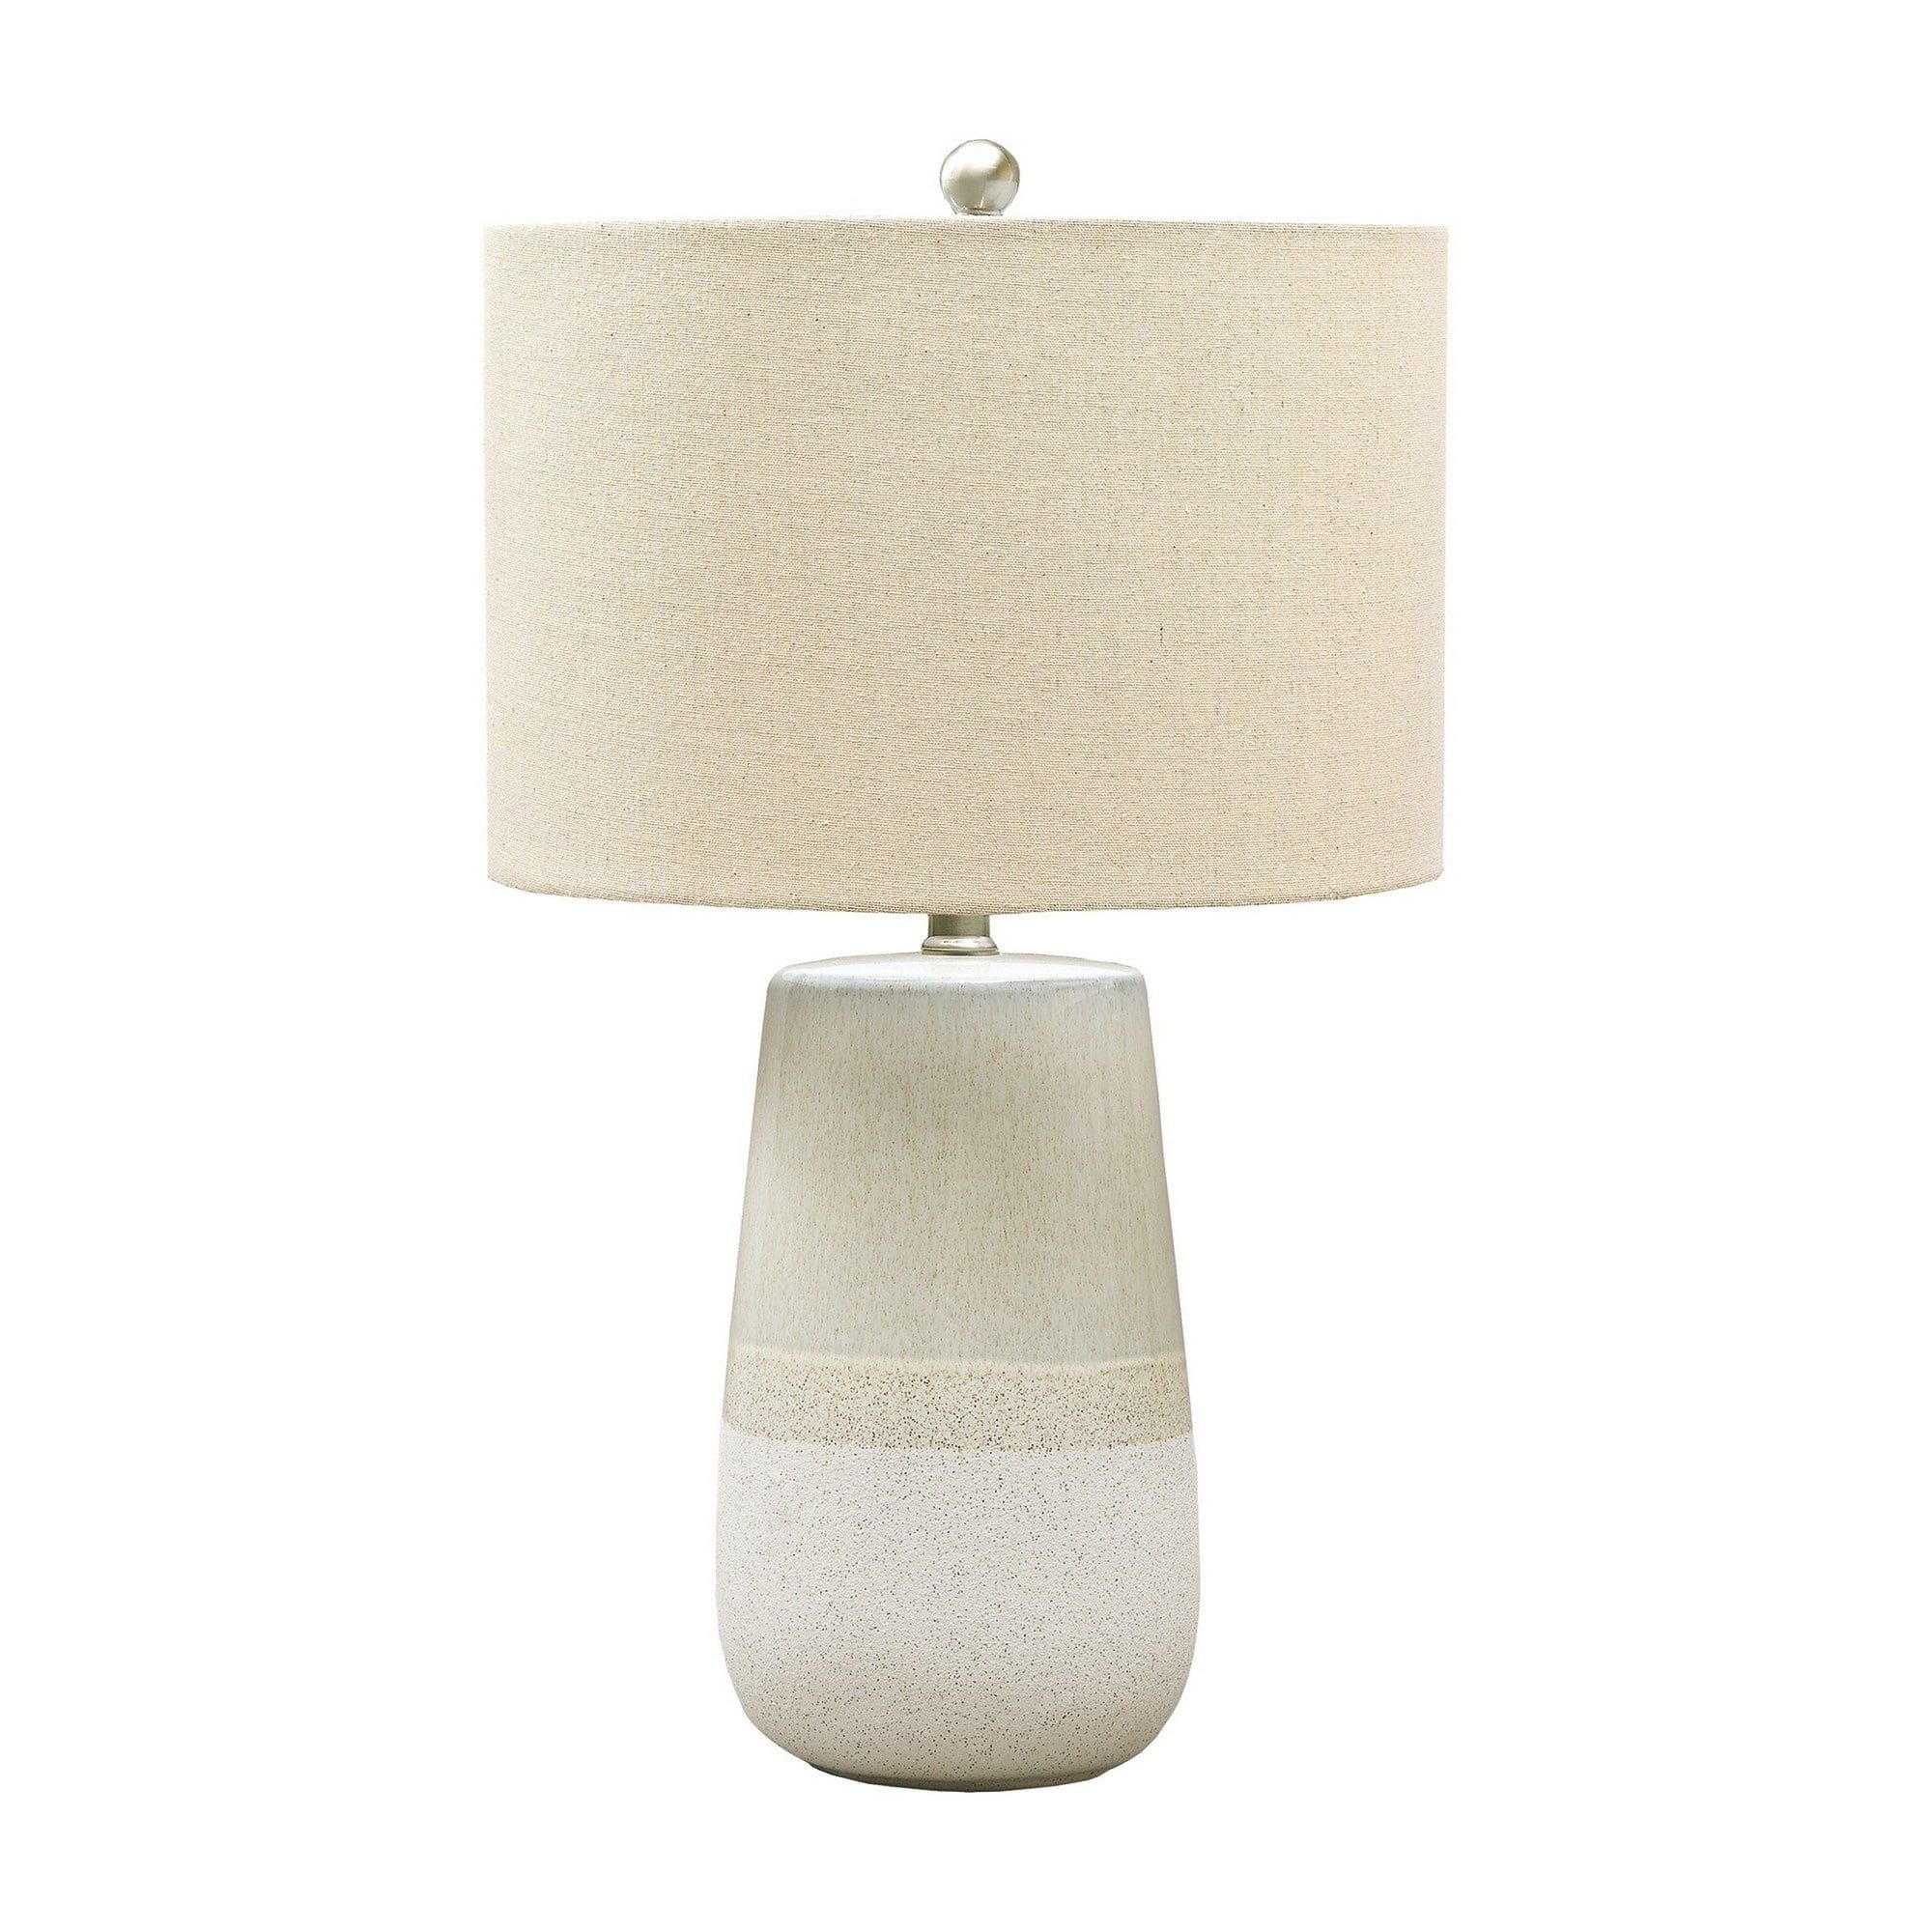 Speckled Ceramic Base Table Lamp with Drum Shade, Beige | Walmart (US)